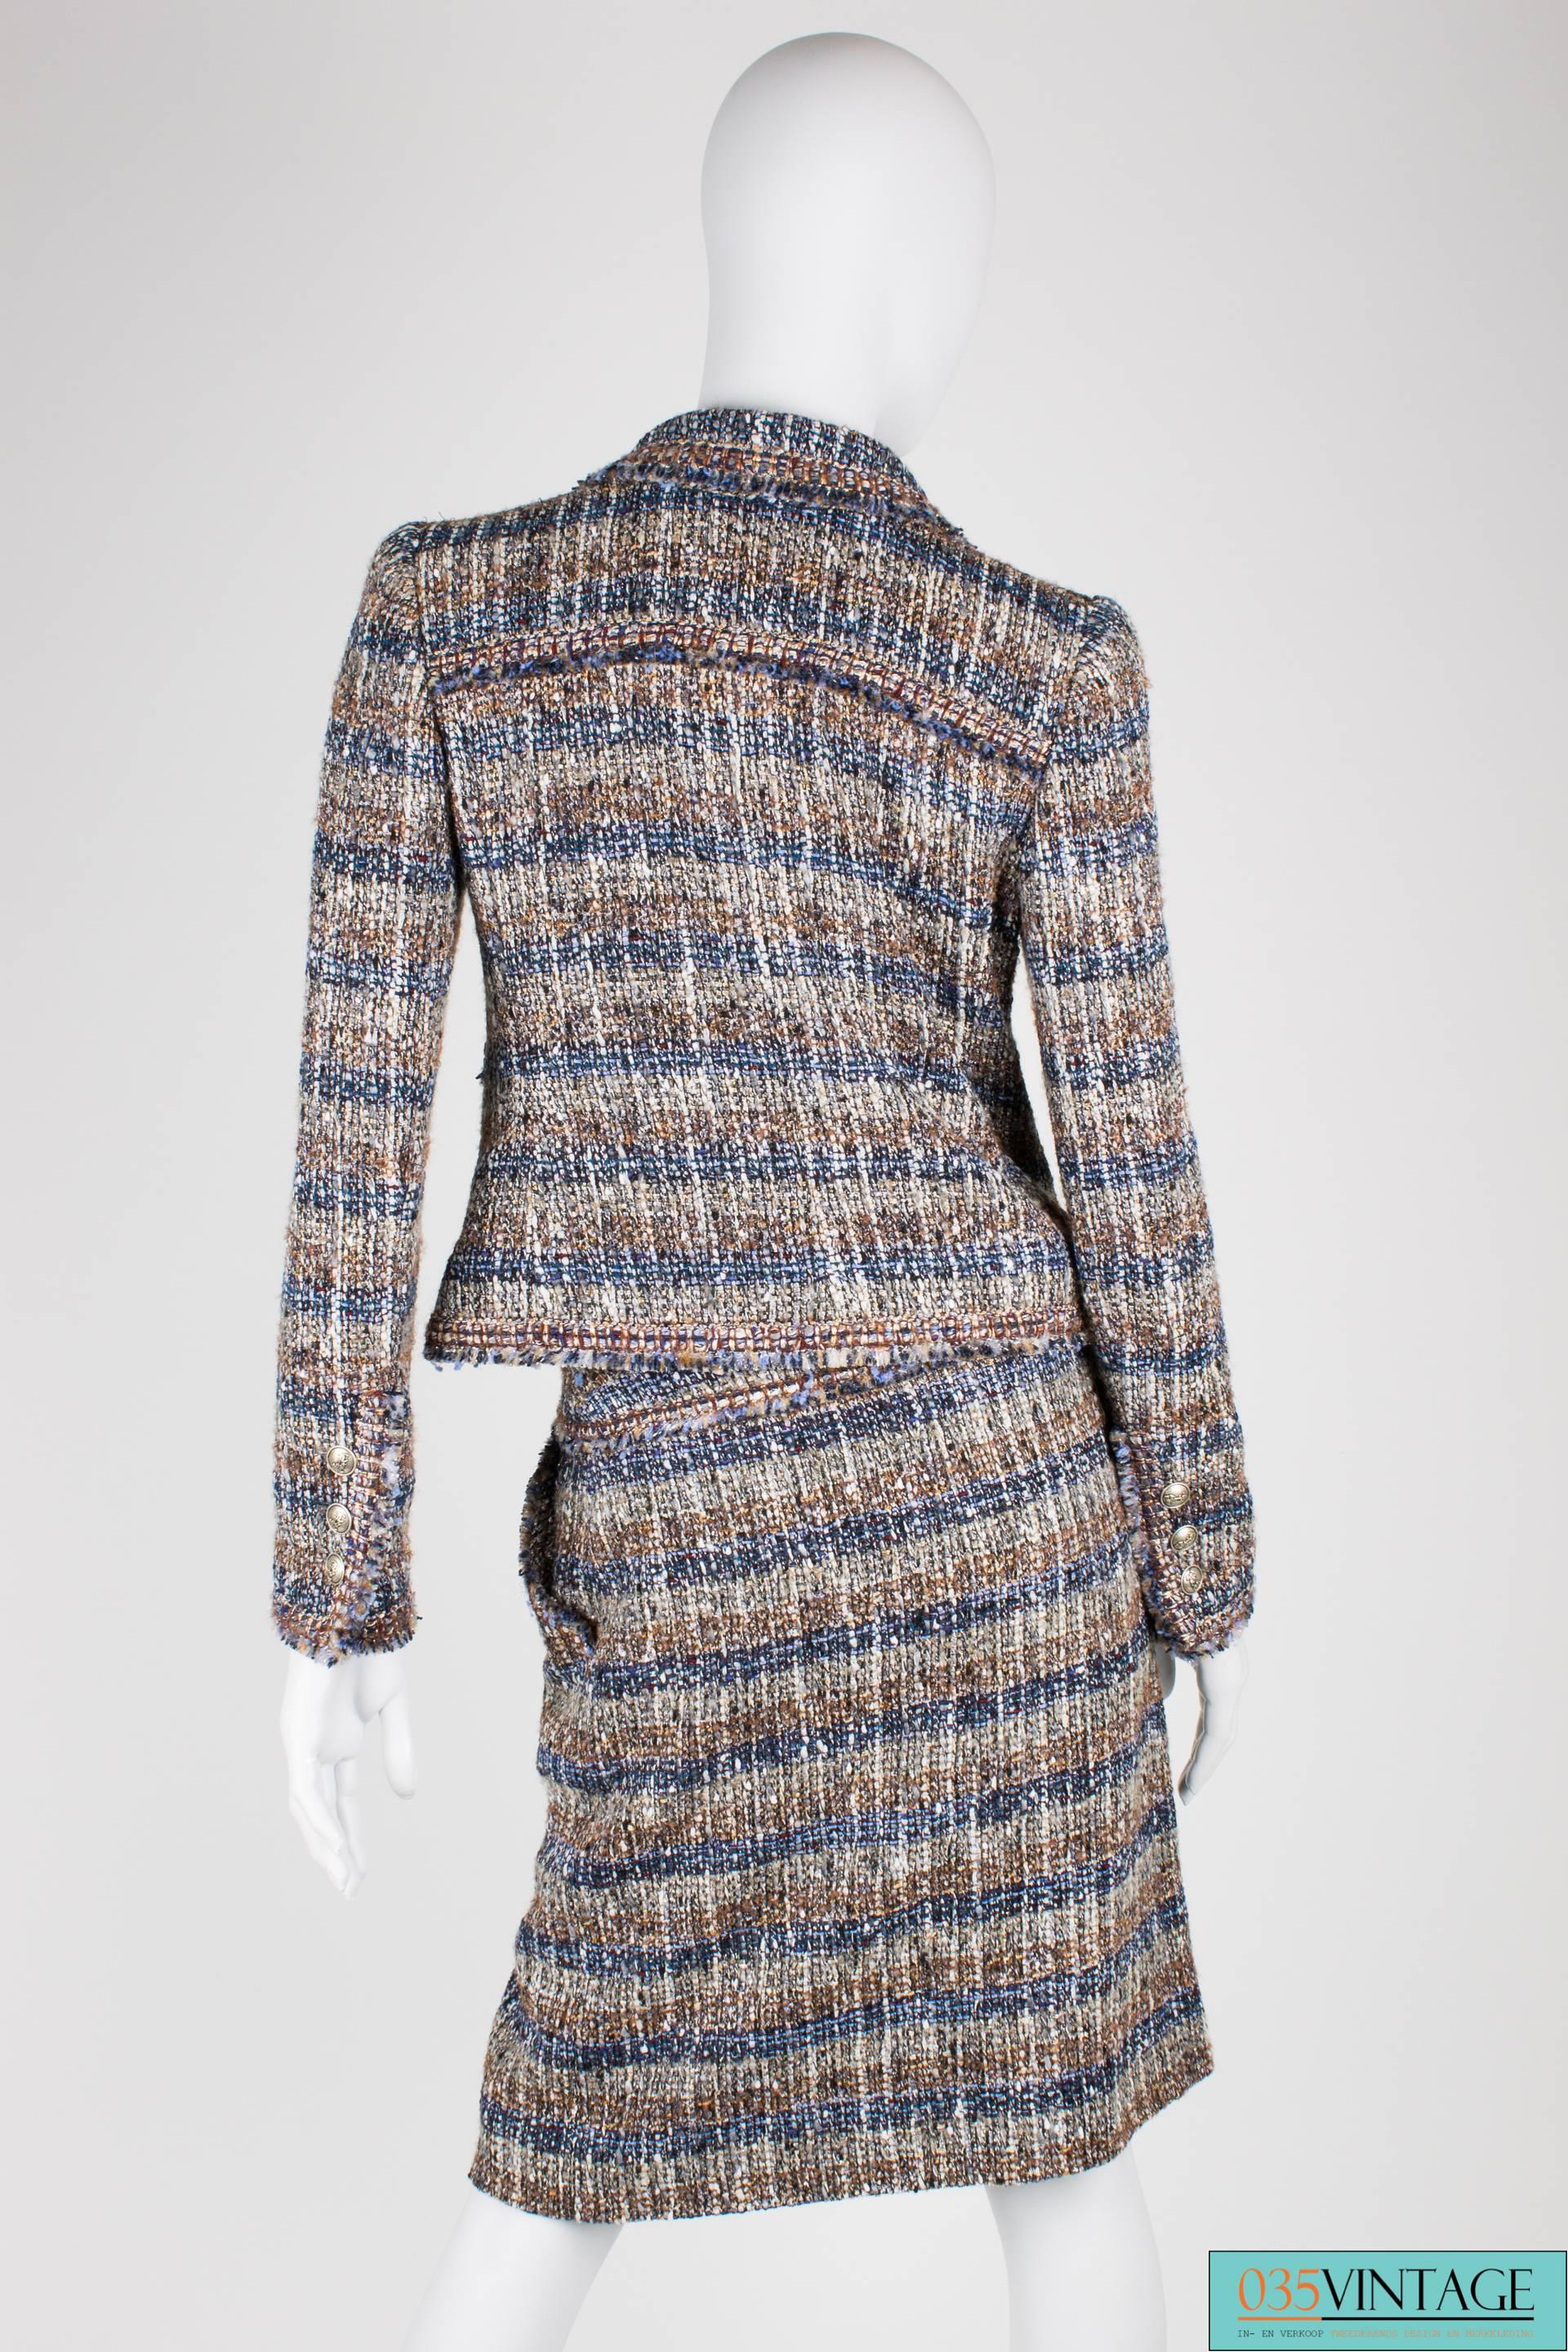 Absolutely gorgeous two-piece suit by Chanel in multi coloured boucle, mainly blue, brown, grey and silver.

The jacket has substantial lapels and front closure with two invisible hook-and-eyes. At the front four pockets in total, two above each